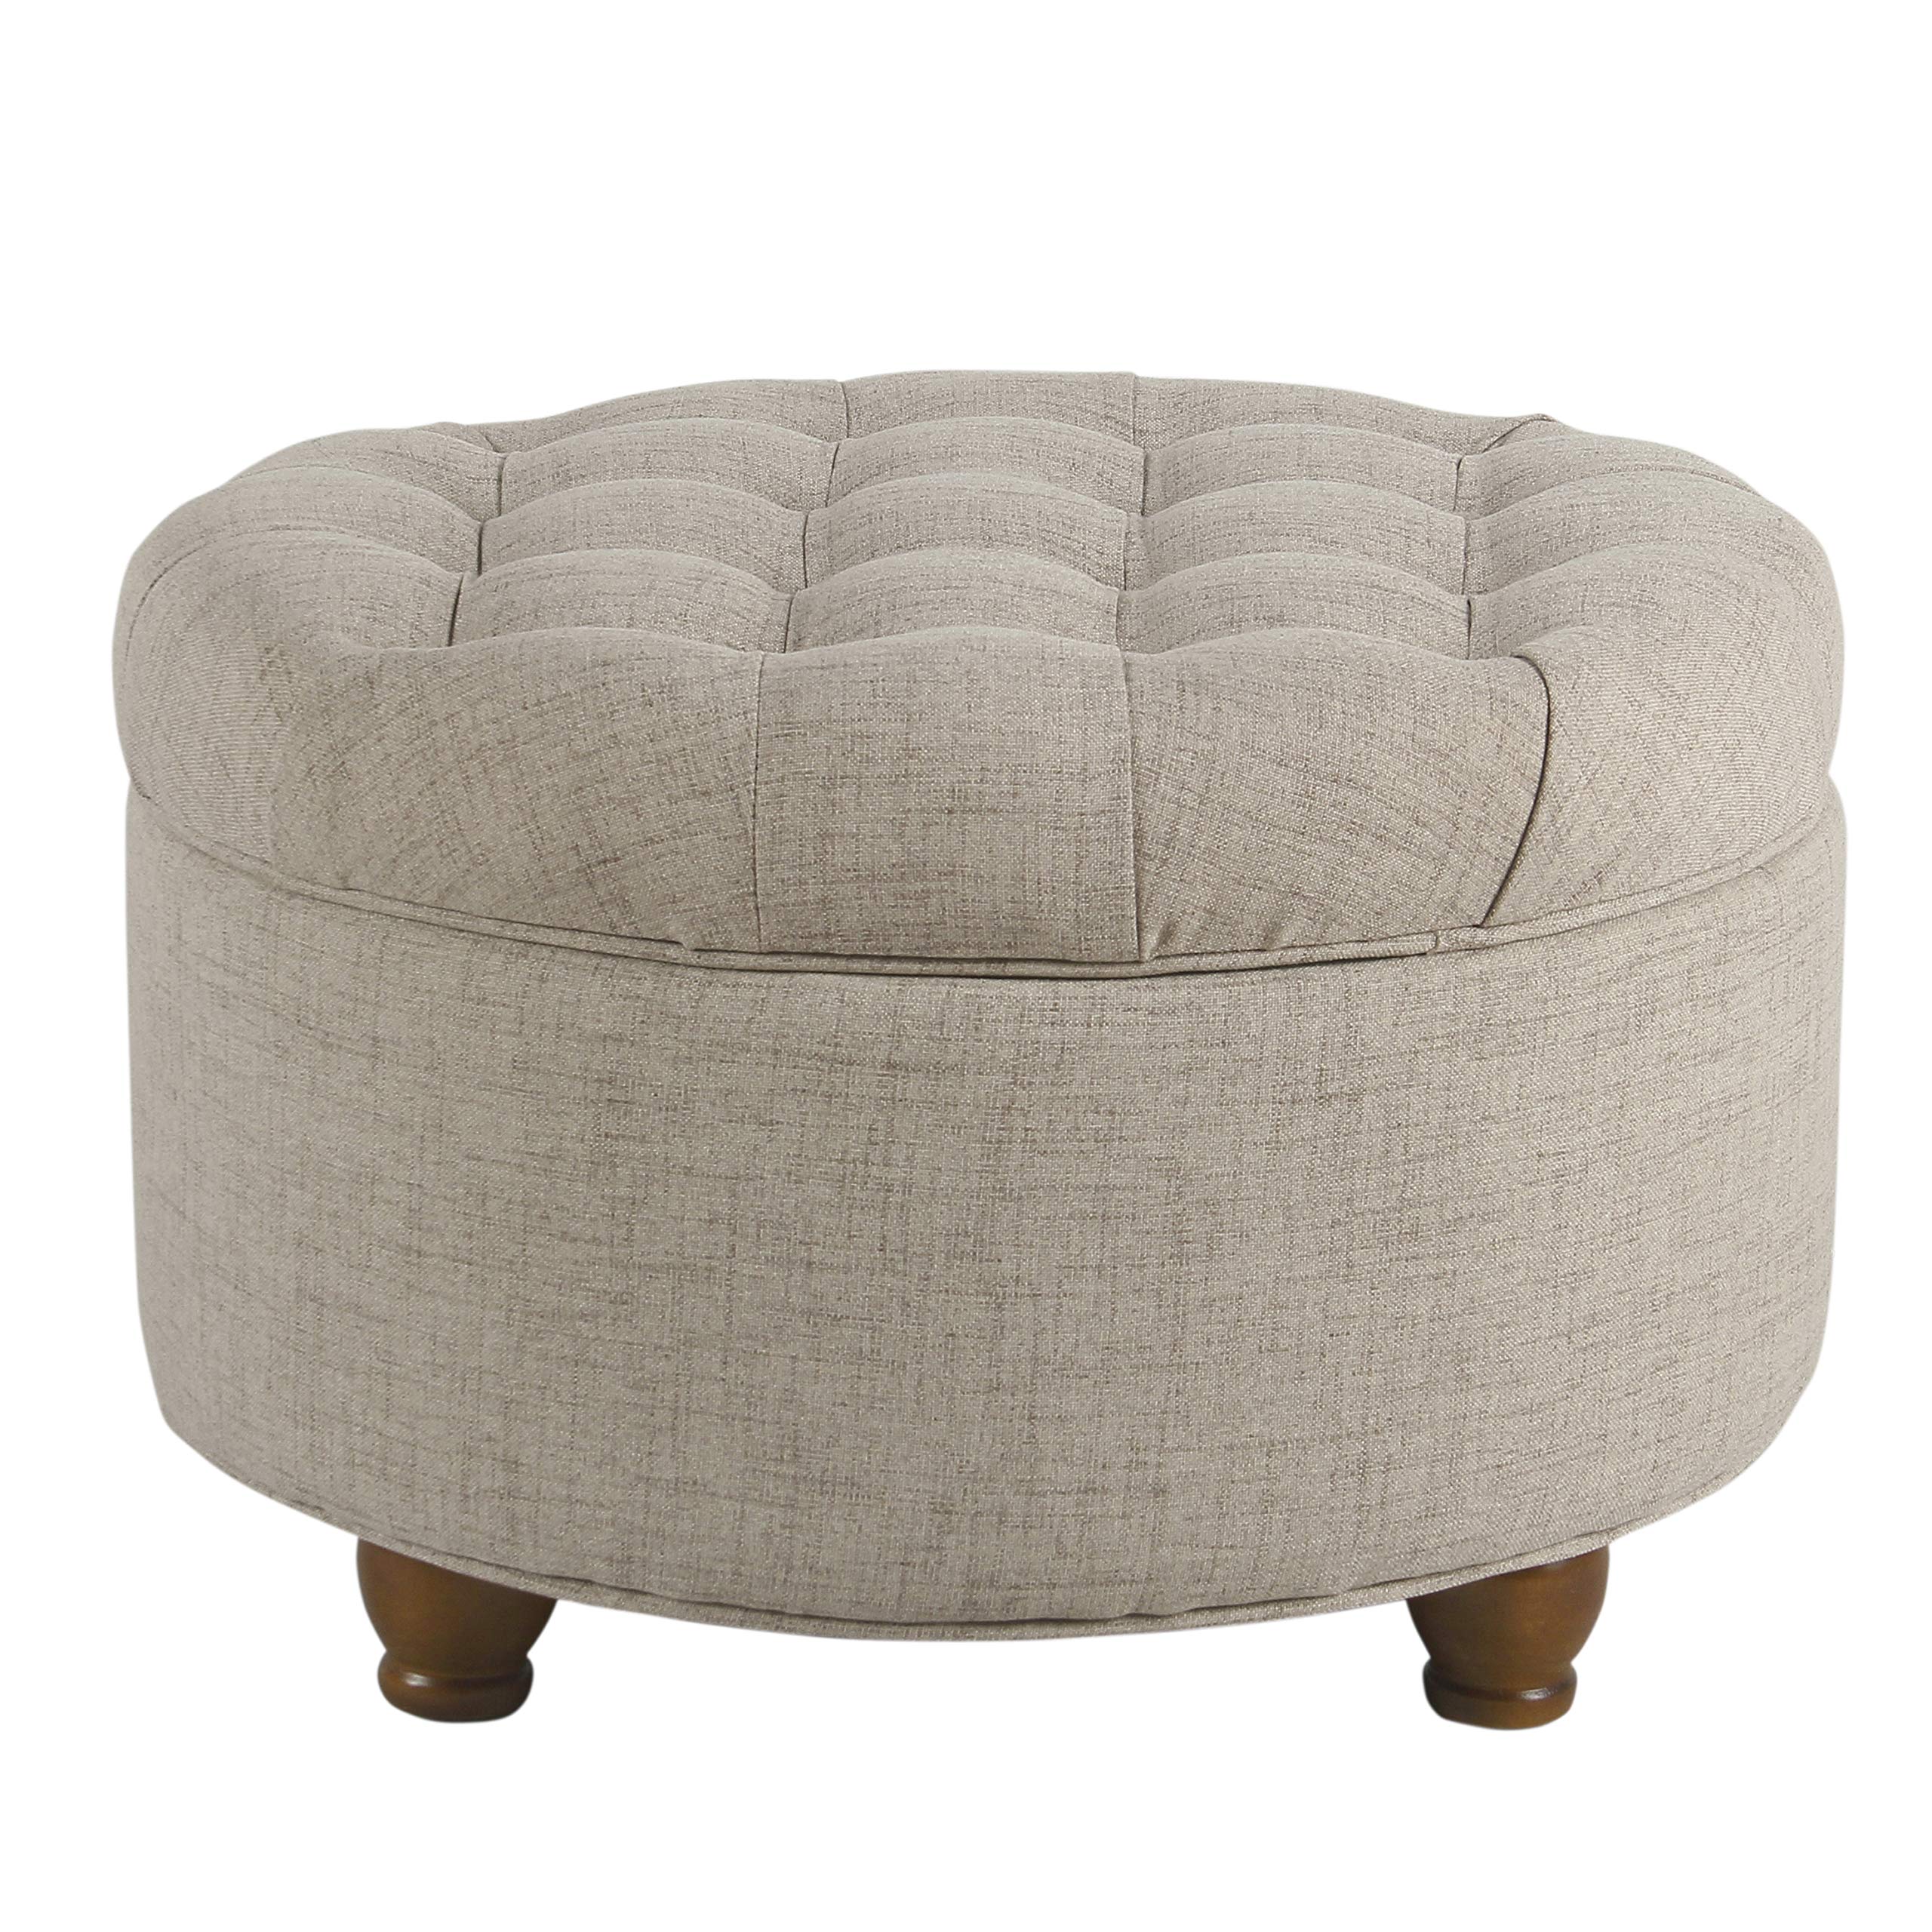 Homepop Home Decor Button Tufted Woven Round Storage Ottoman Large